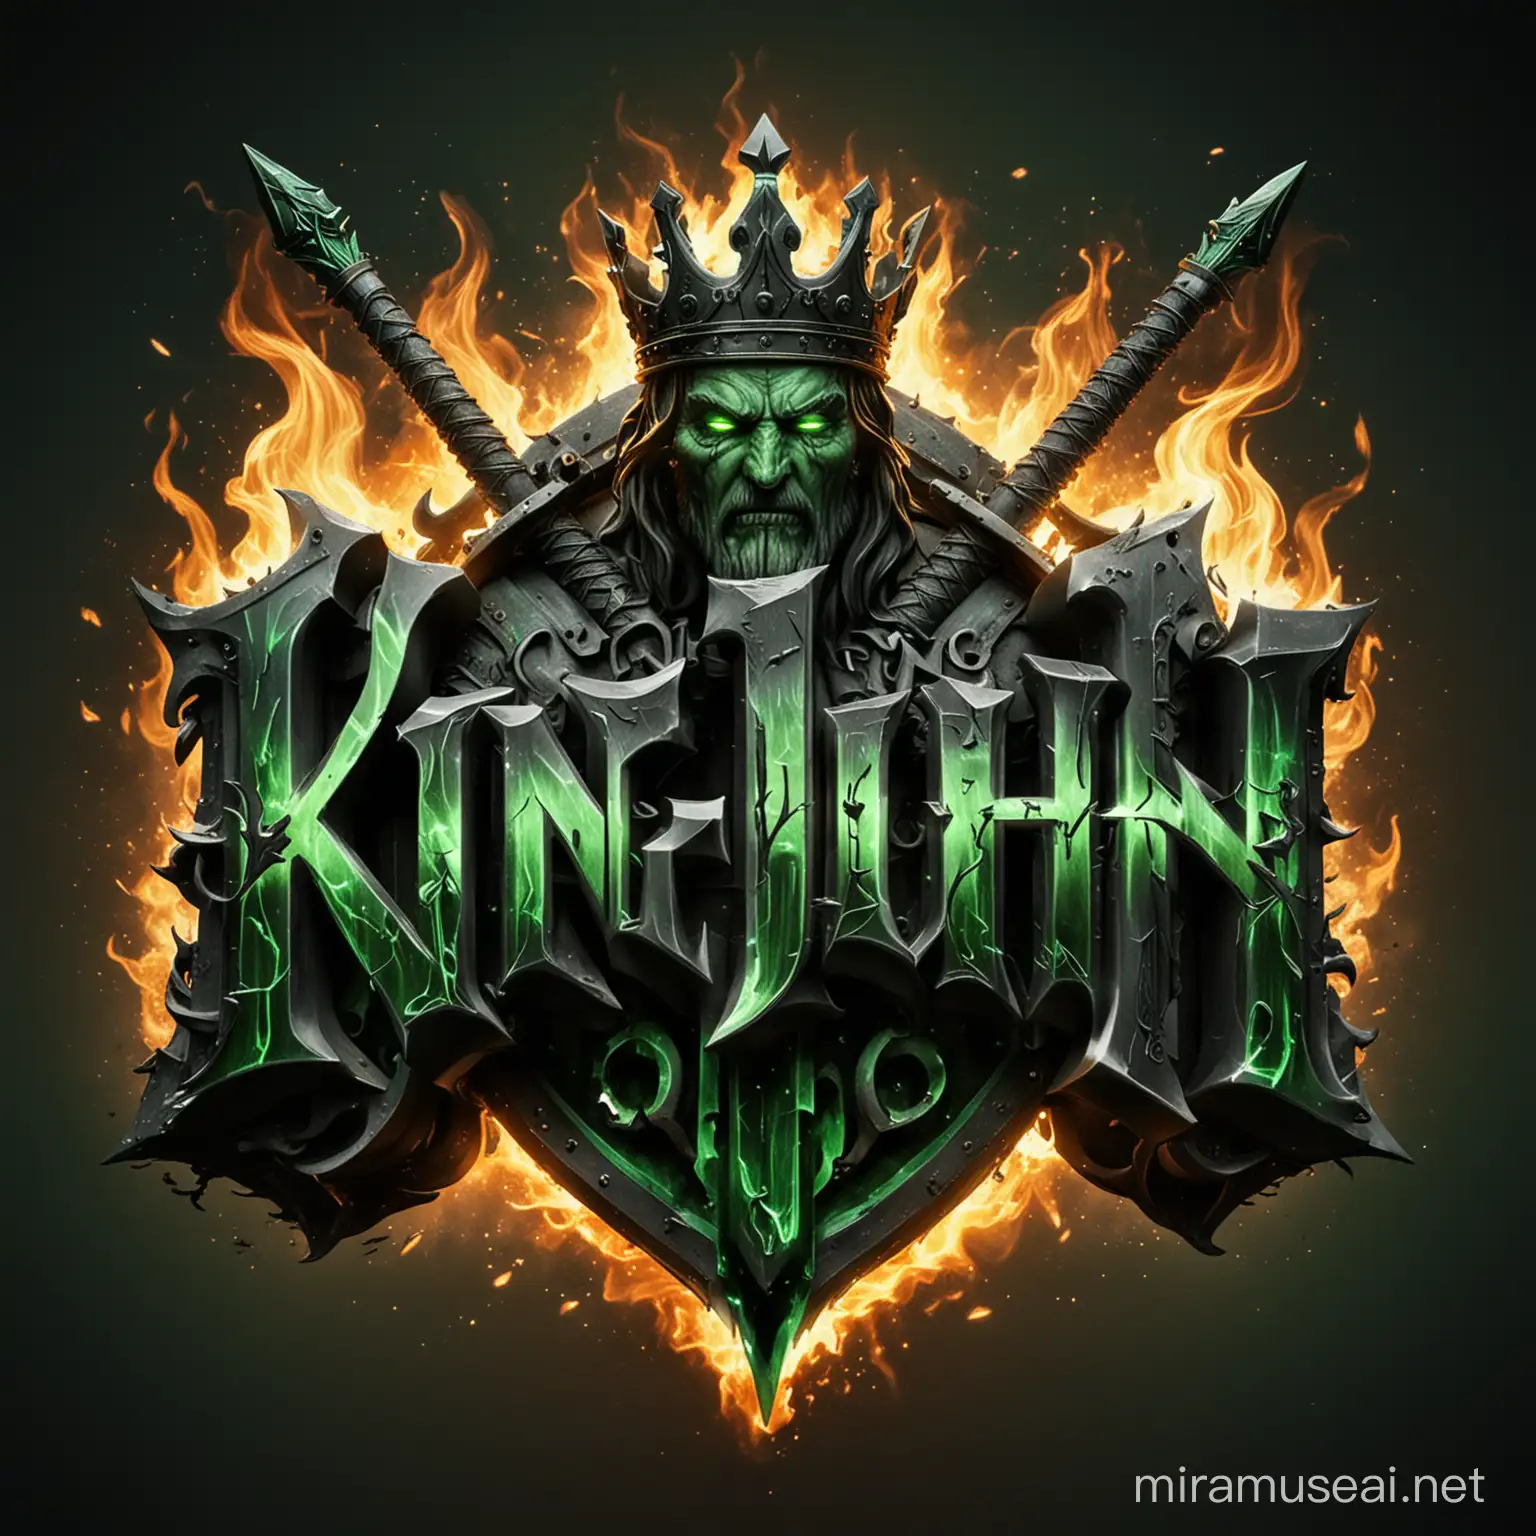 3d logo,king with 2 swords black and green flames, written the name "king John"